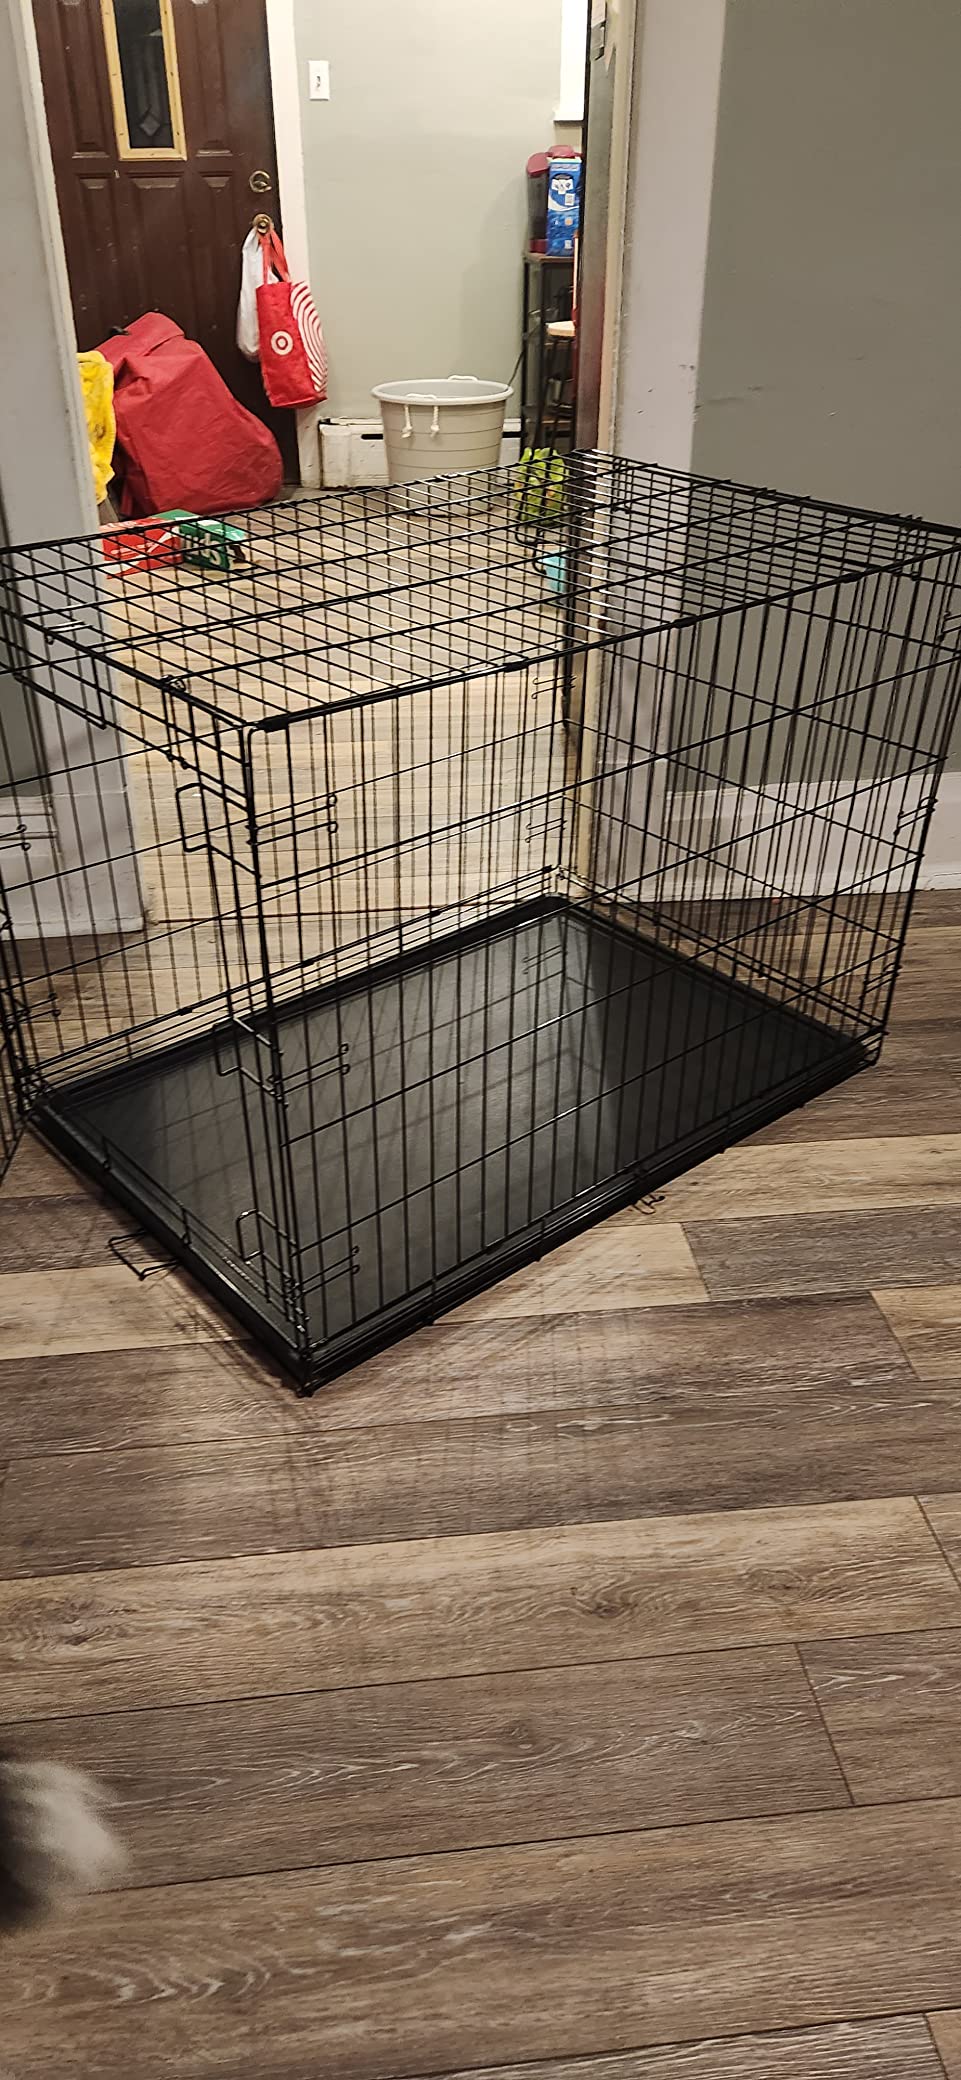 Heavy Duty Dog Cage - with free eBook